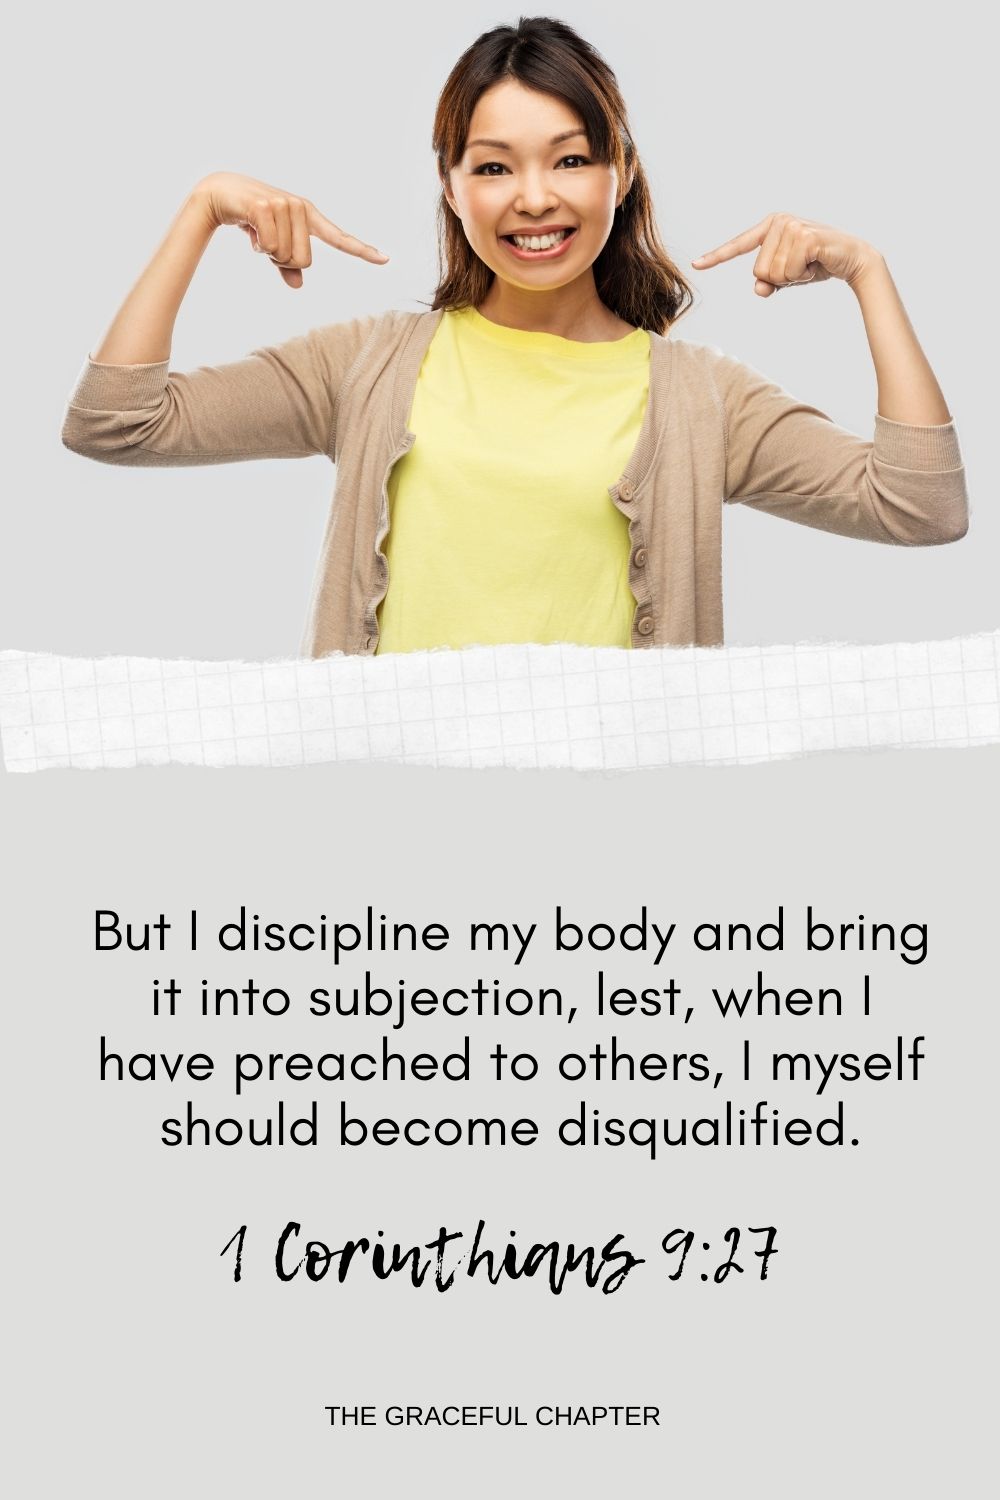 But I discipline my body and bring it into subjection, lest, when I have preached to others, I myself should become disqualified. 1 Corinthians 9:27